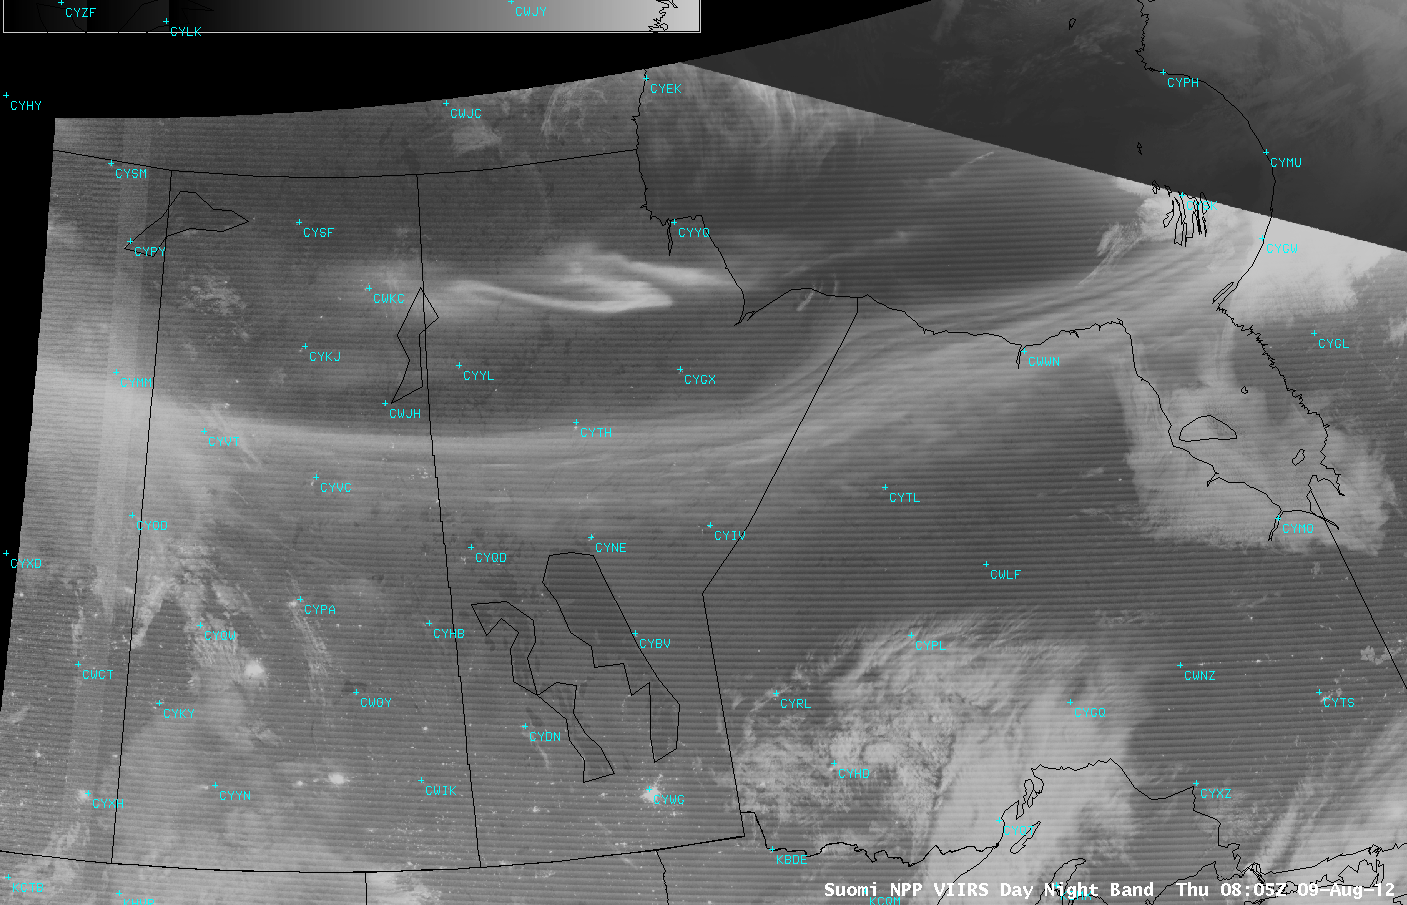 Suomi NPP VIIRS 0.7 Âµm Day/Night Band, 11.45 Âµm IR, and 11.45-3.74 Âµm "fog/stratus product" images